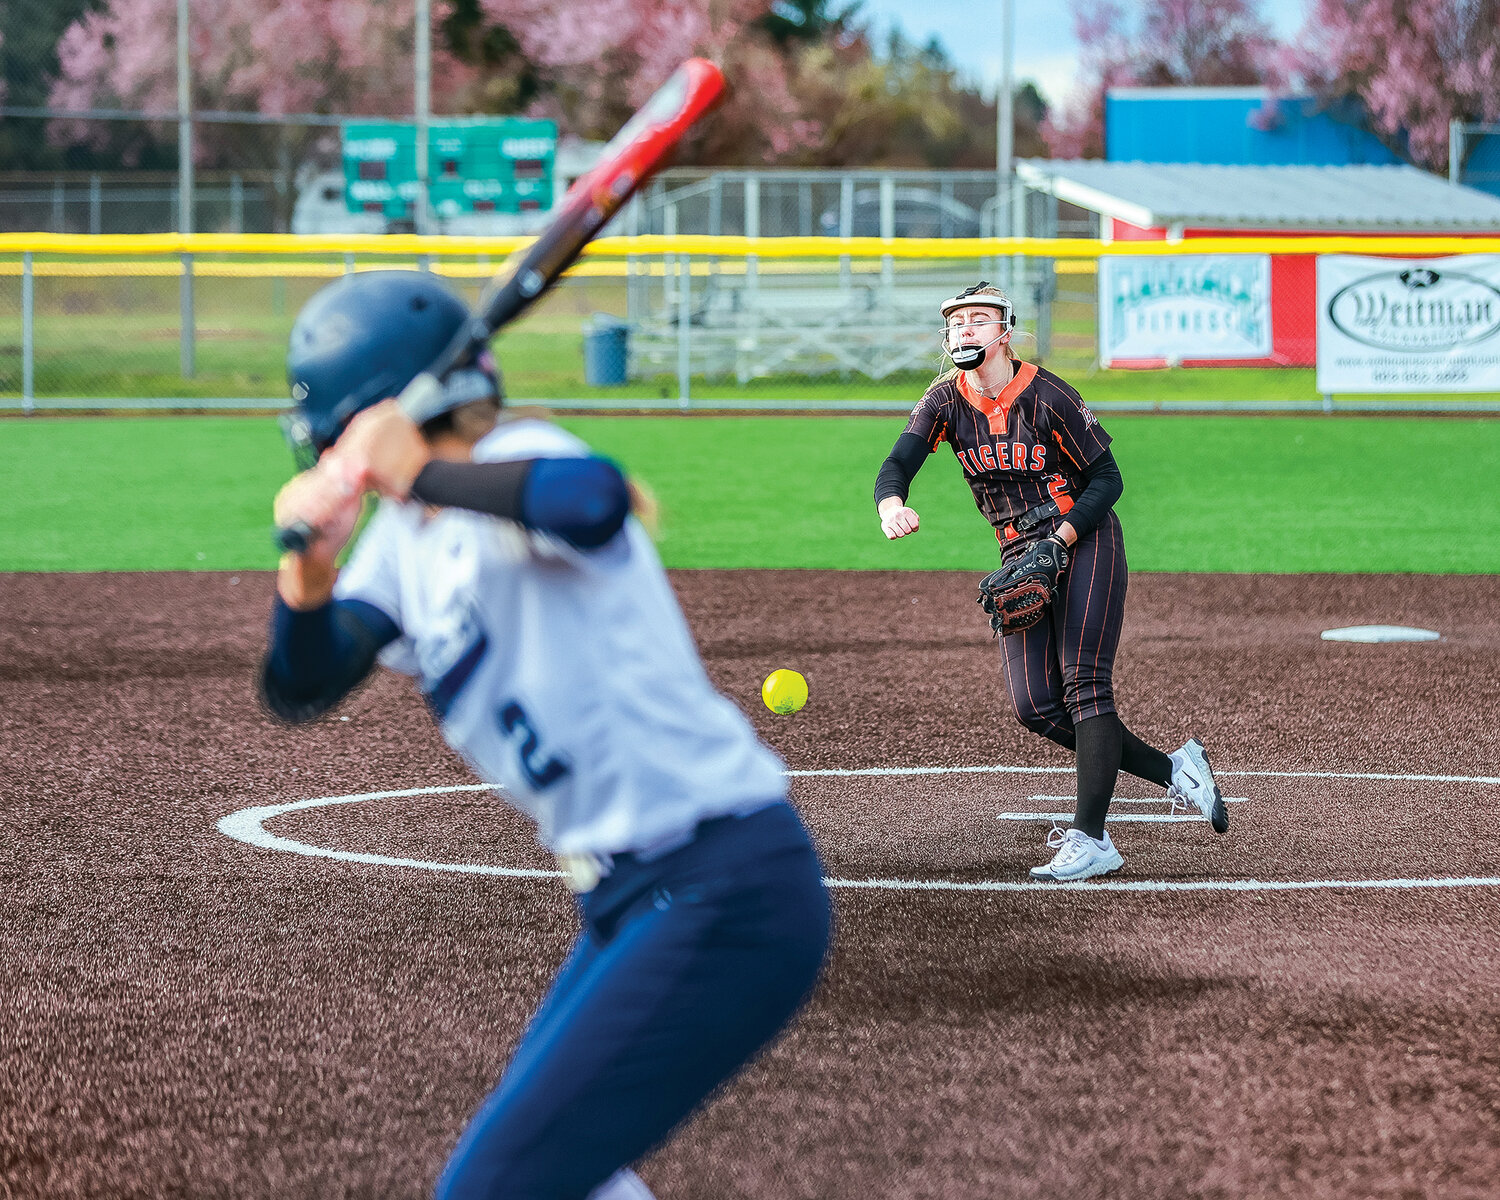 Rylee Rehbein fires in a pitch for Battle Ground during the team's loss to Skyview at Fort Vancouver High School on Wednesday, April 12.